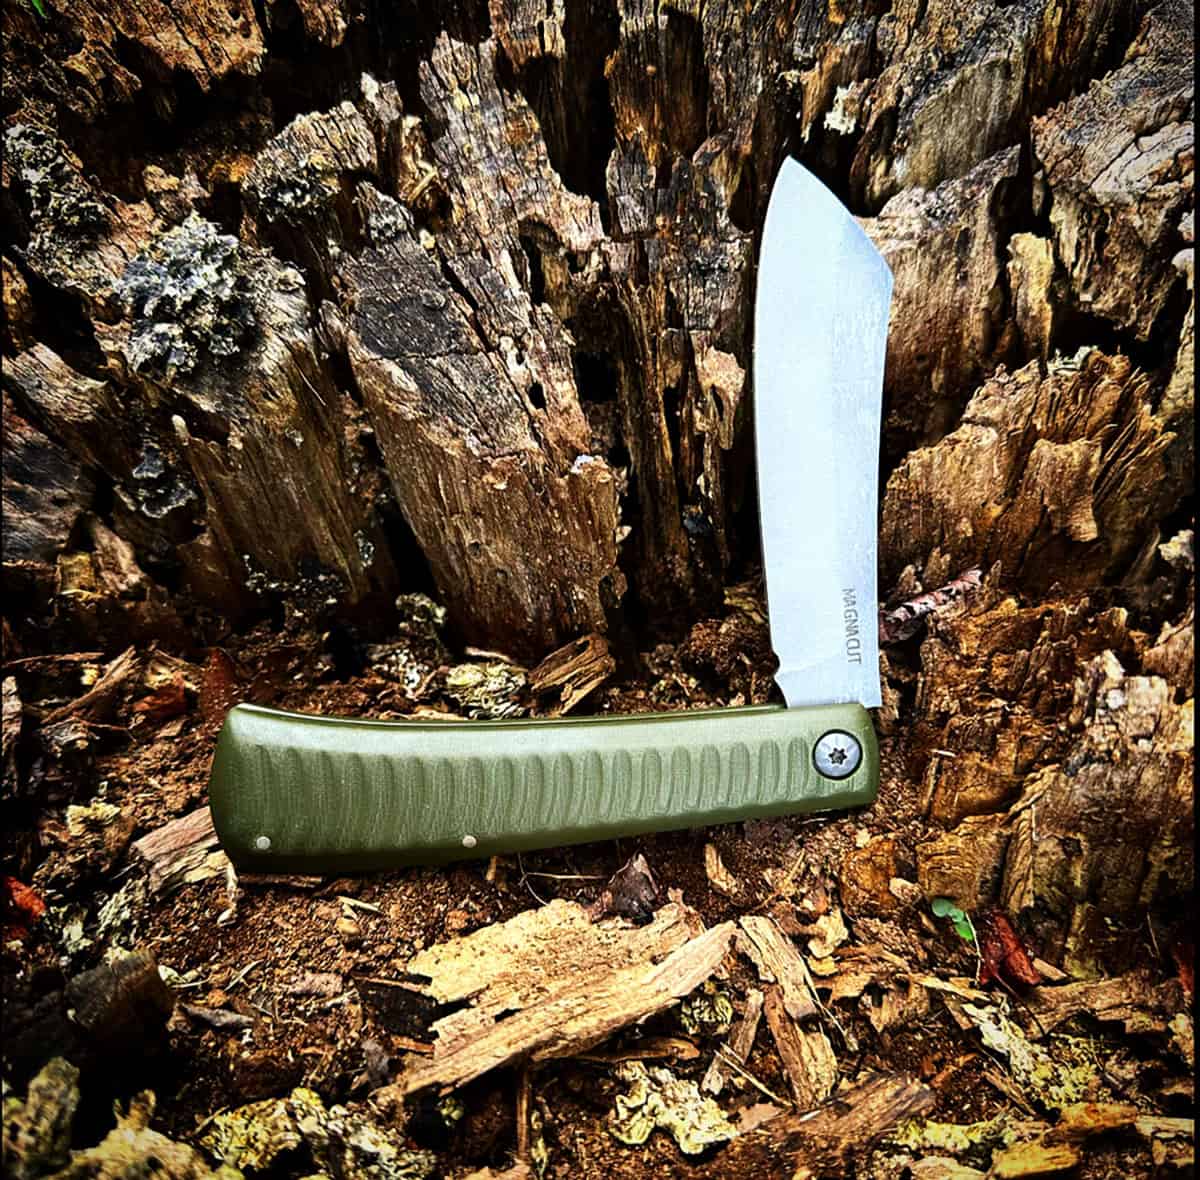 The Bonds Creek King Trapper is one of the best slip joints we have tested from an edge retention standpoint. 